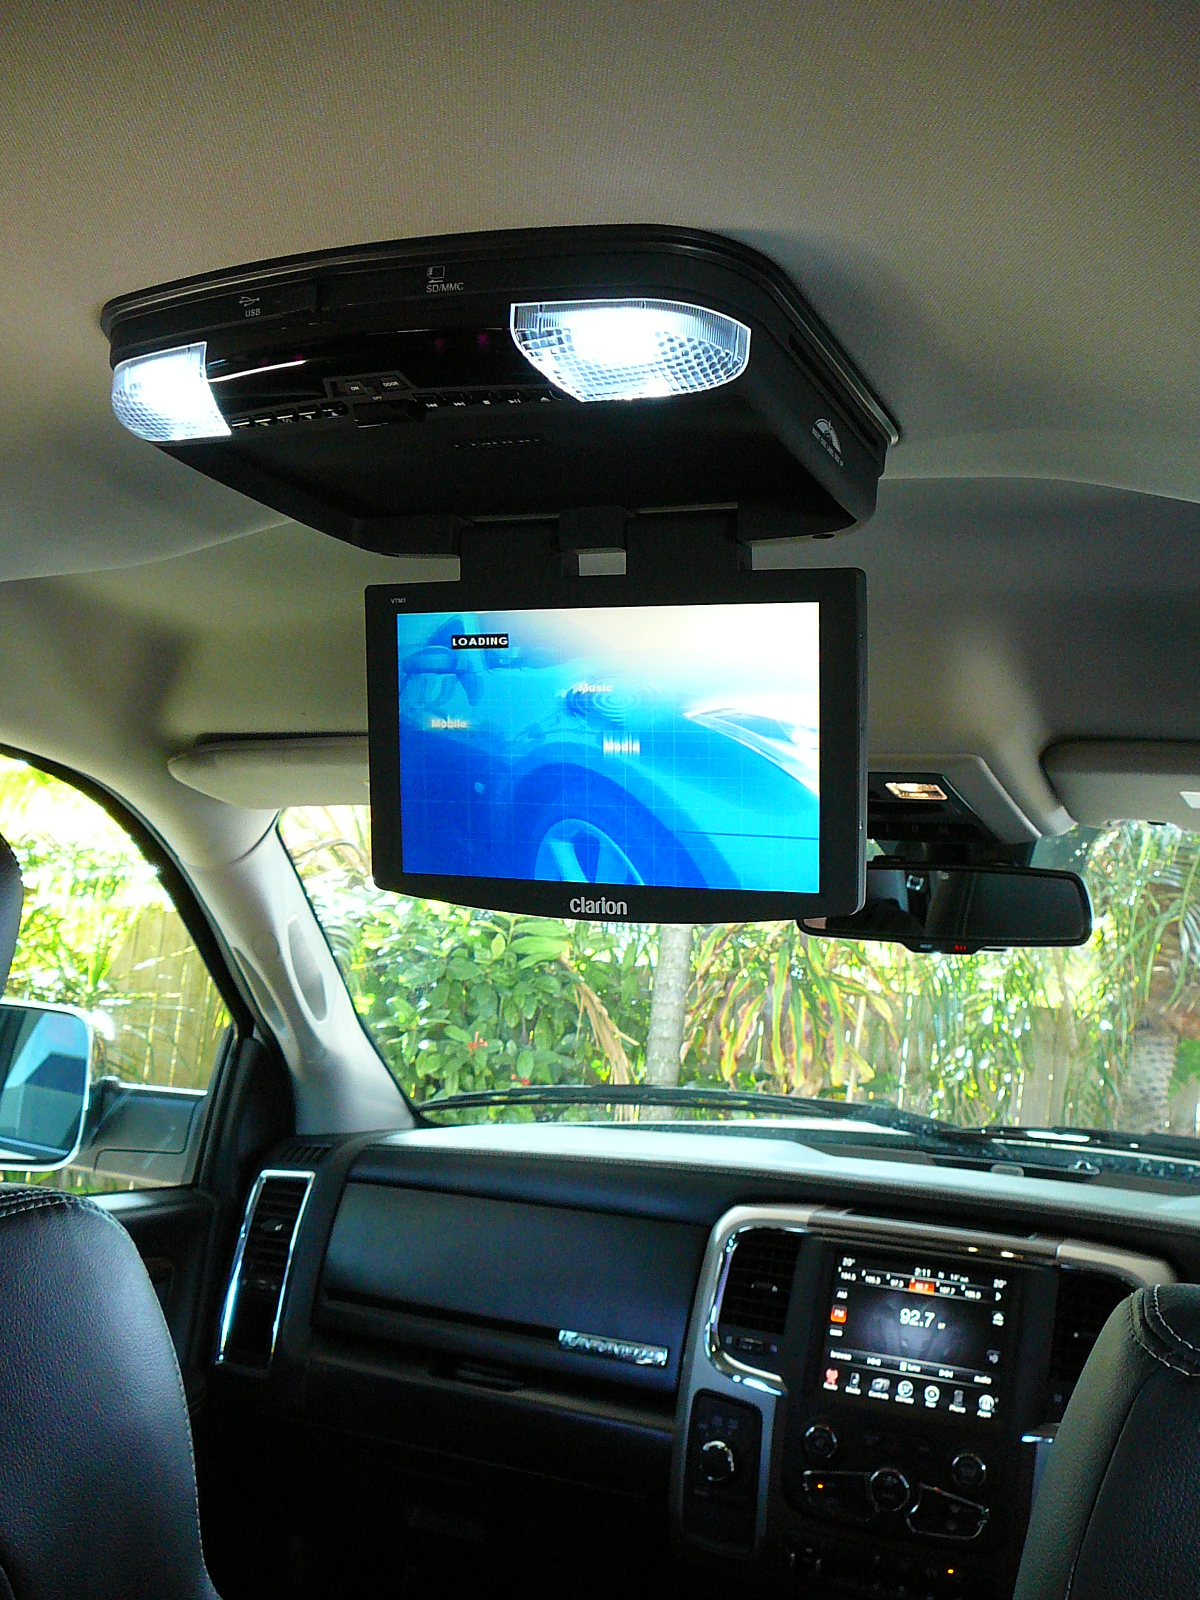 Jeep Grand Cherokee 2014, Clarion VTM 1 DVD Roof Screen